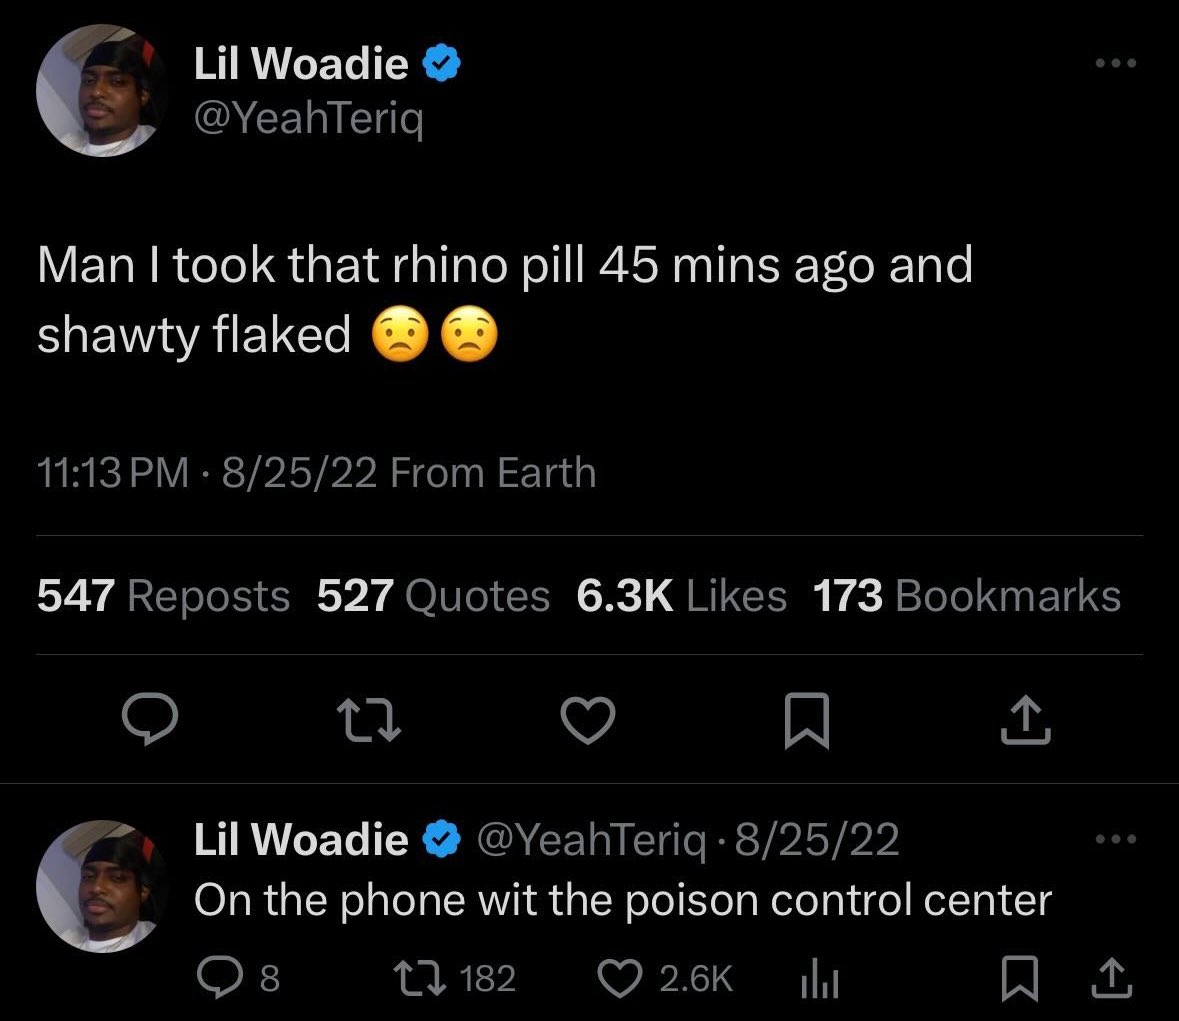 funny tweets june 2024 - screenshot - Lil Woadie Man I took that rhino pill 45 mins ago and shawty flaked 82522 From Earth 547 Reposts 527 Quotes 173 Bookmarks Lil Woadie 82522 On the phone wit the poison control center 8 182